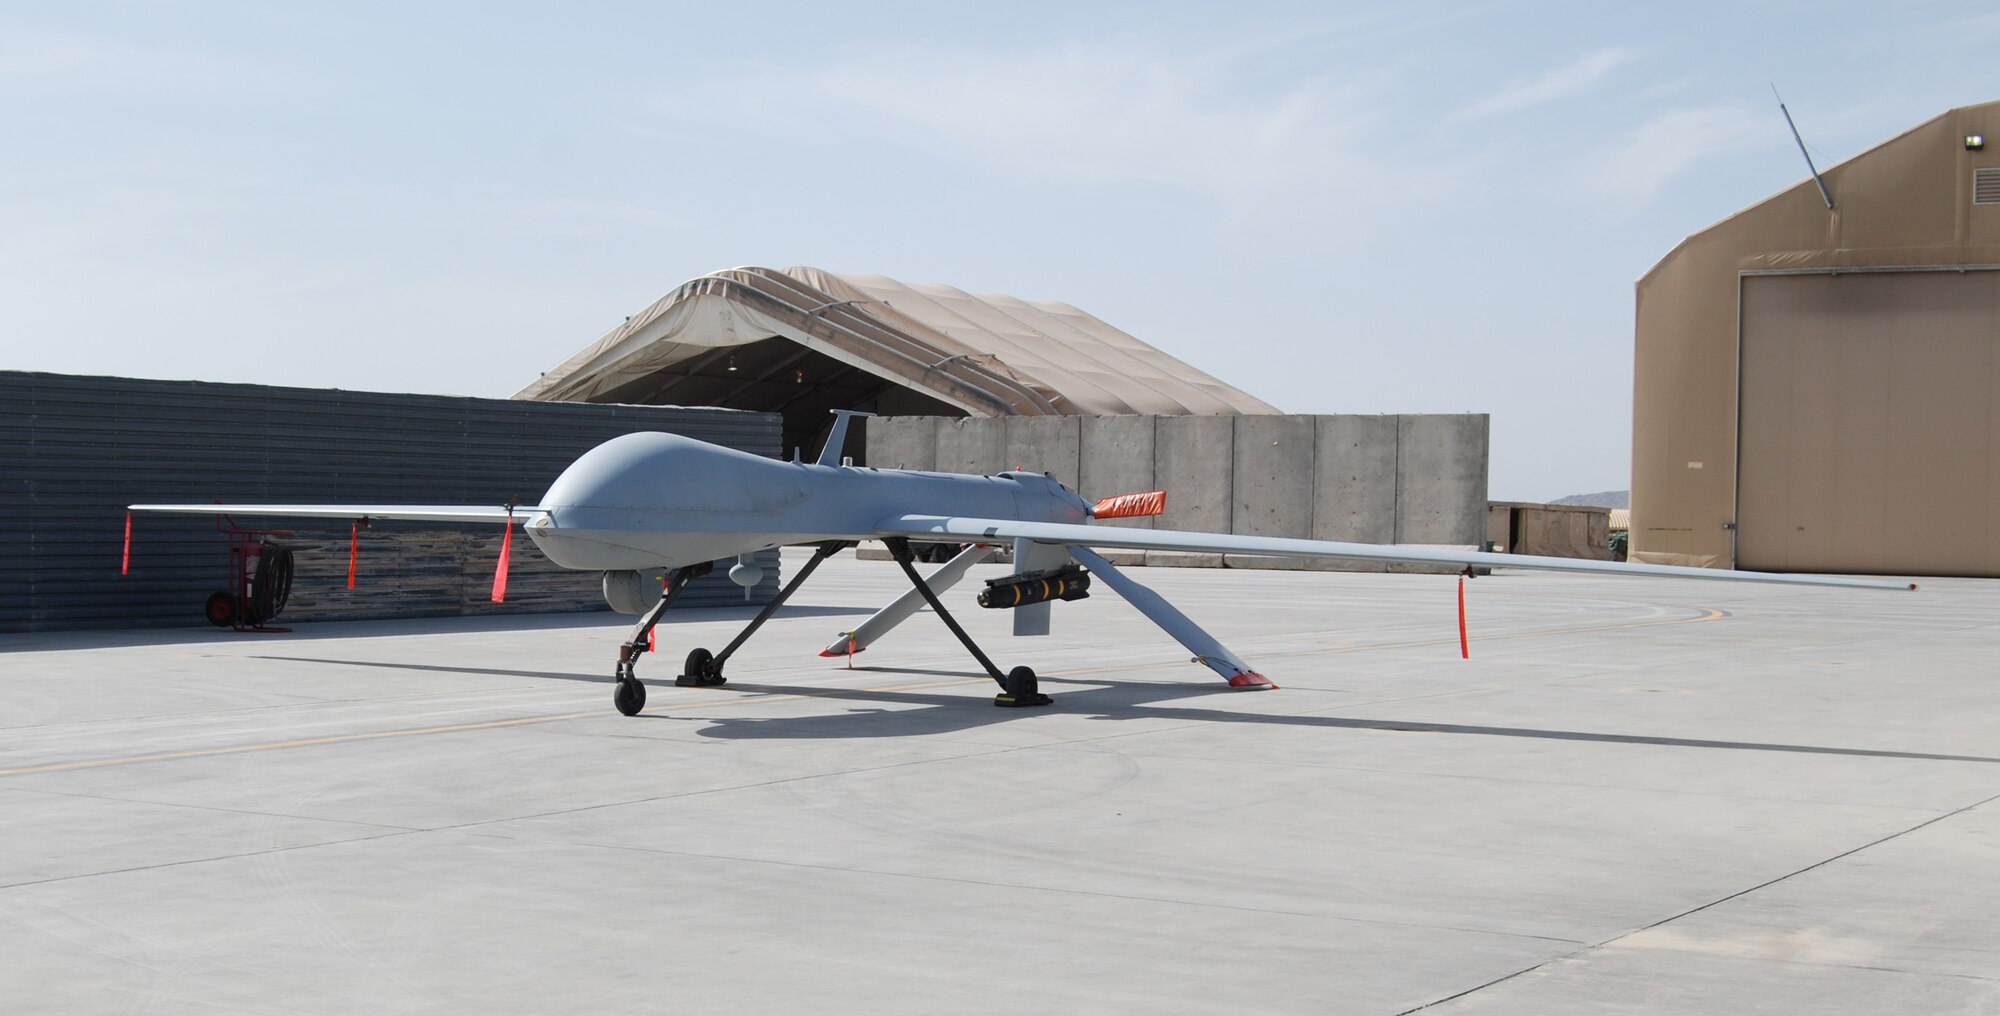 An MQ-1 Predator sits on the ramp at Kandahar Airfield, March 19, 2014. The MQ-1 is assigned to and operated by the 451st Air Expeditionary Group. (U.S. Air Force photo by Capt. Brian Wagner/Released)